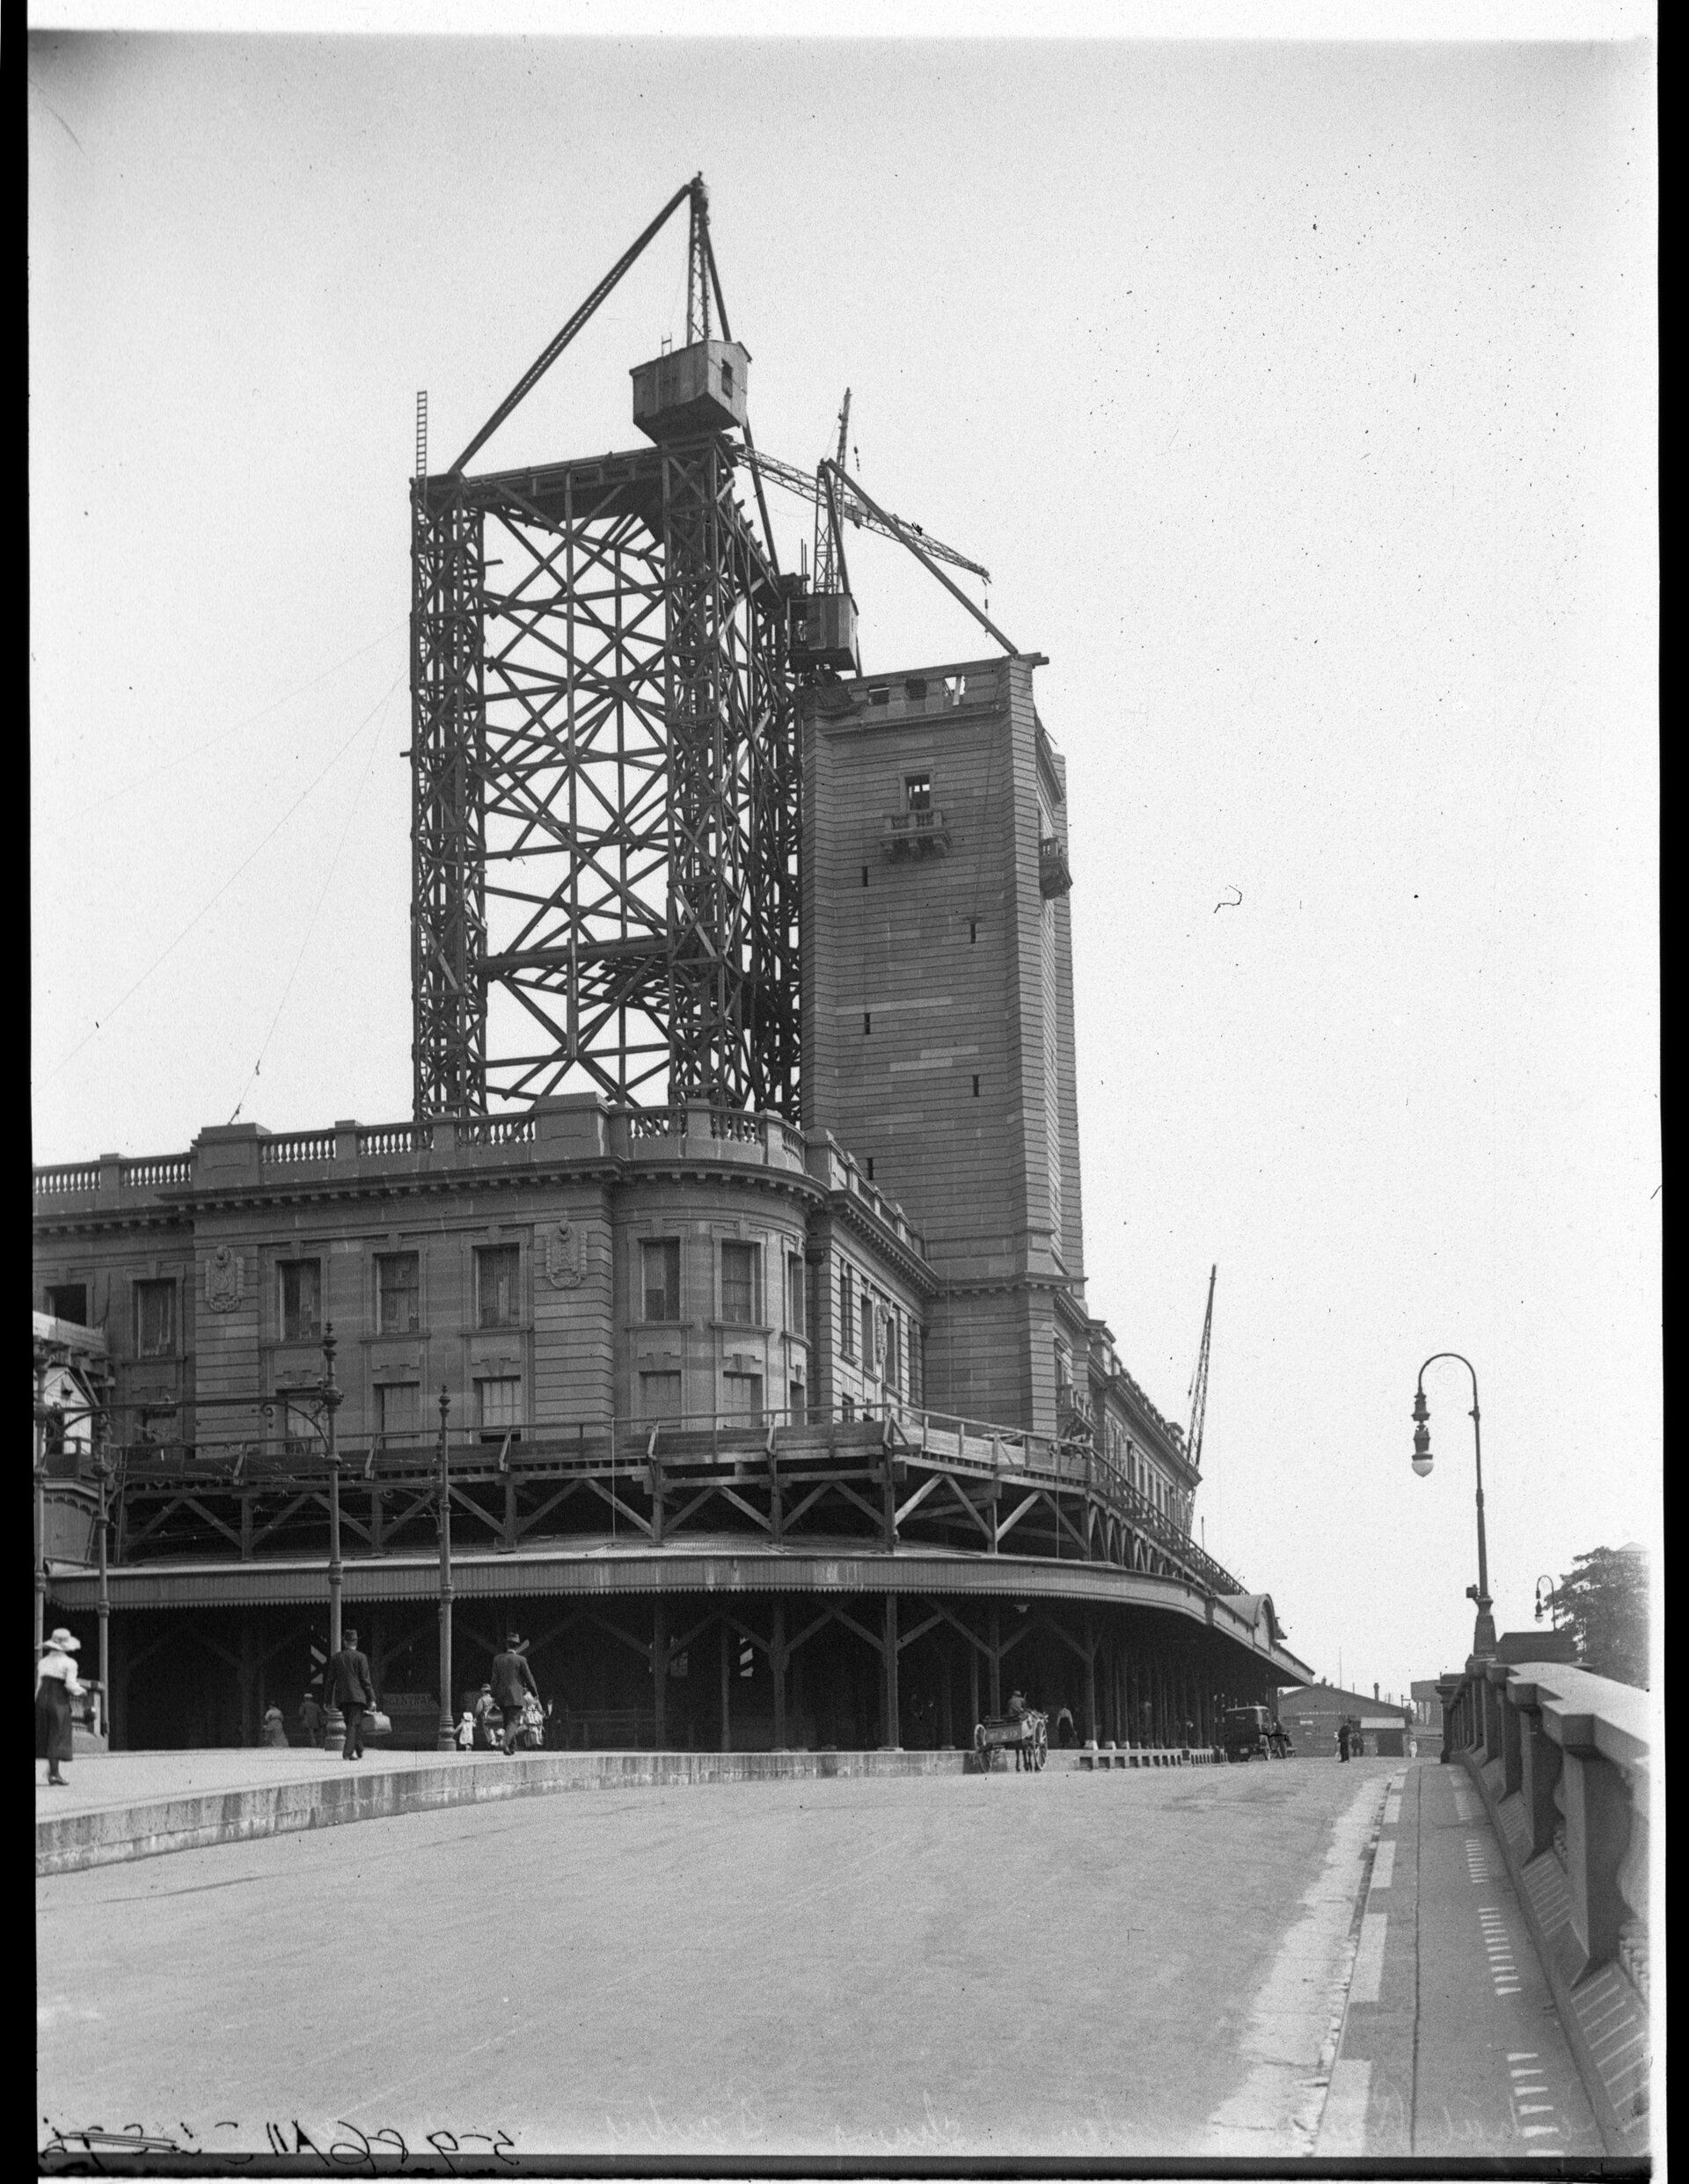 Construction of clock tower at Central Station, 1919.